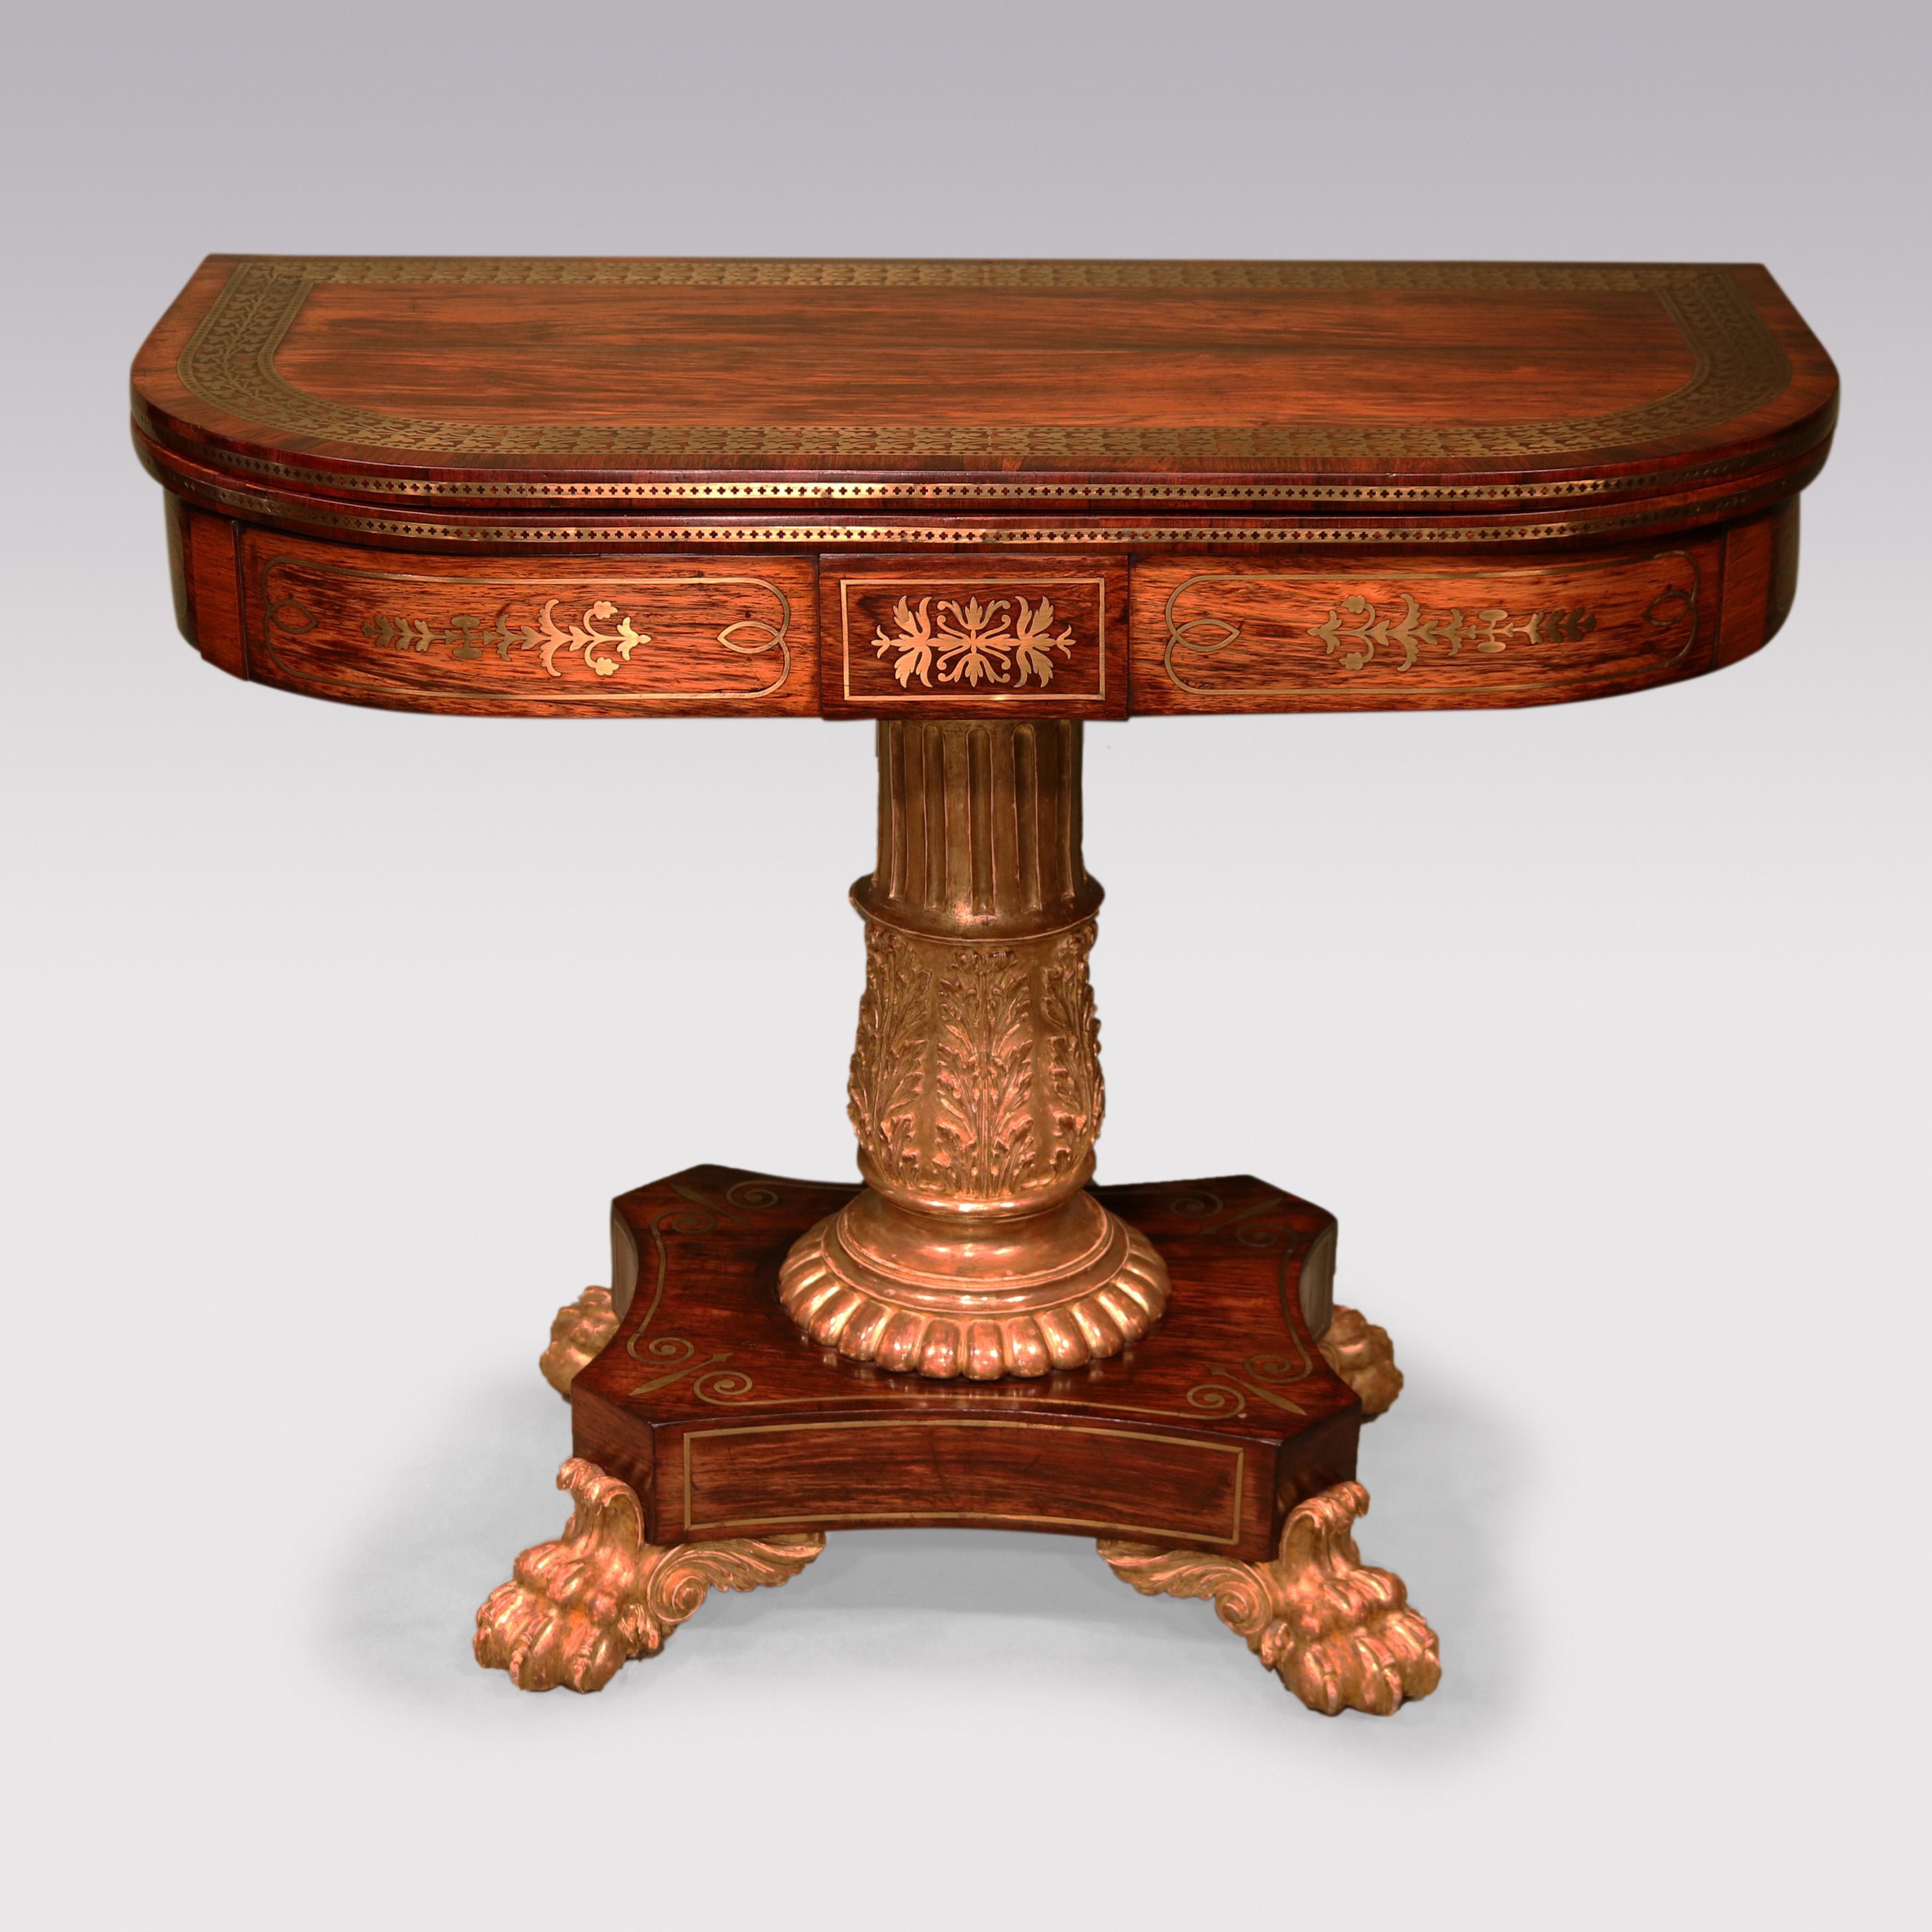 A rare late Regency period rosewood D-shaped Card Table having extremely fine brass inlay to interior, exterior and frieze, supported on fluted & acanthus carved centre pedestal raised on concave platform base ending on carved lion’s paw feet.